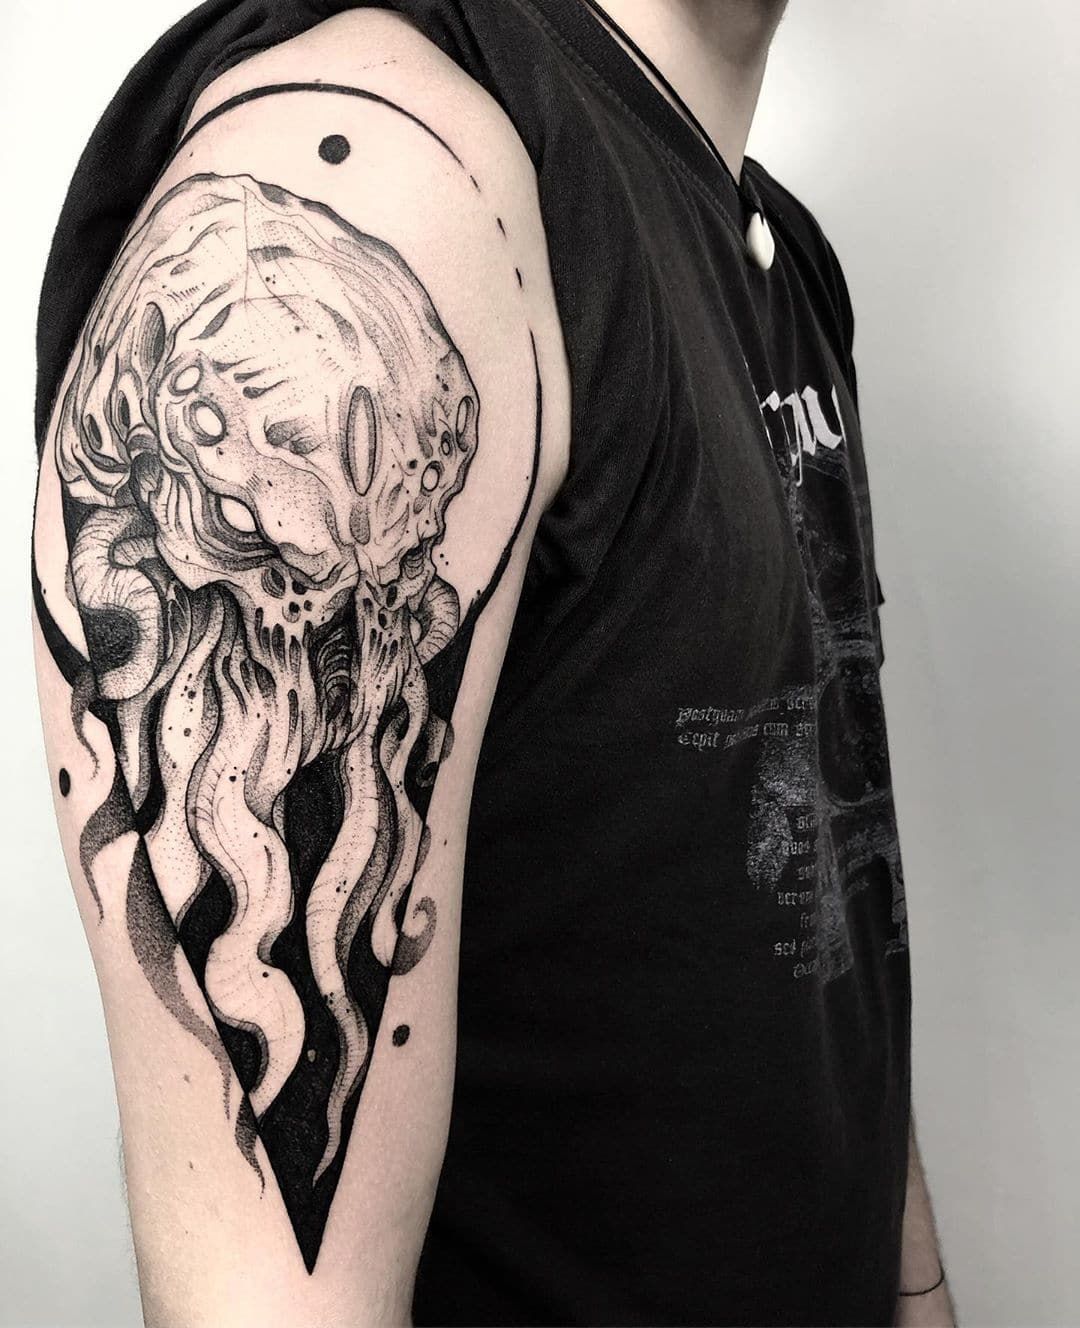 Cthulhu tattoo meaning